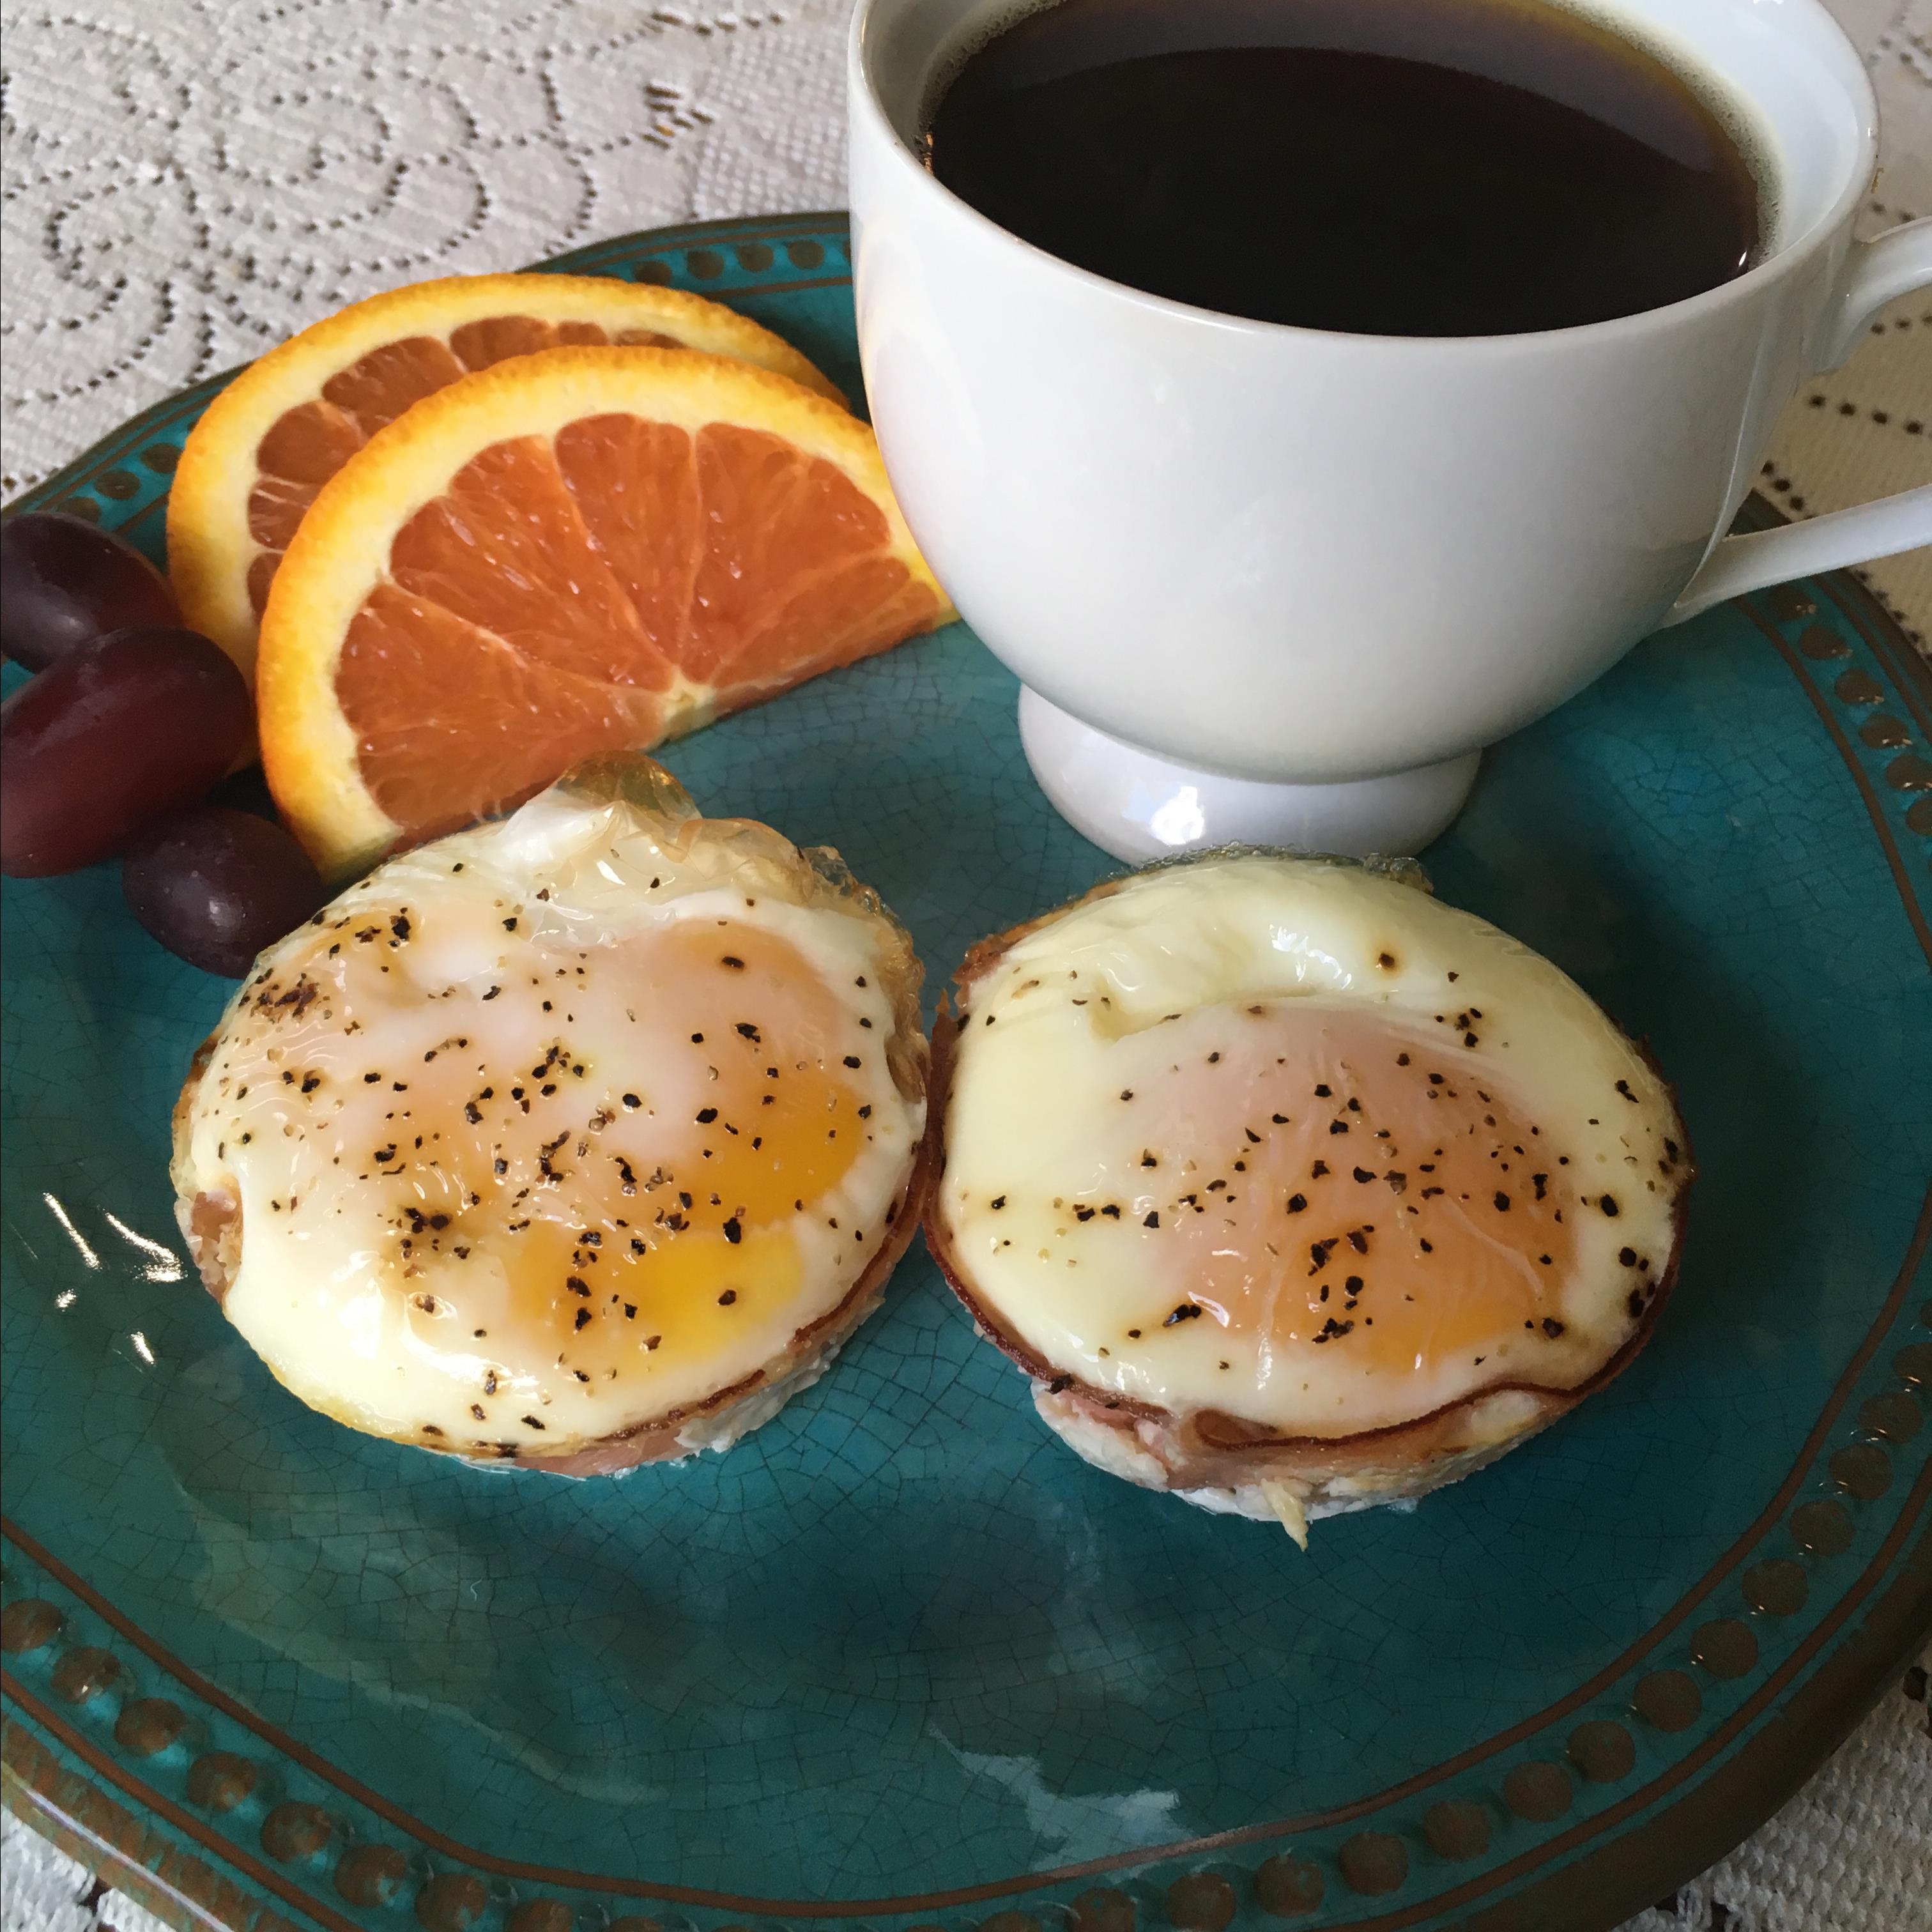 Breakfast Ham and Egg Cups